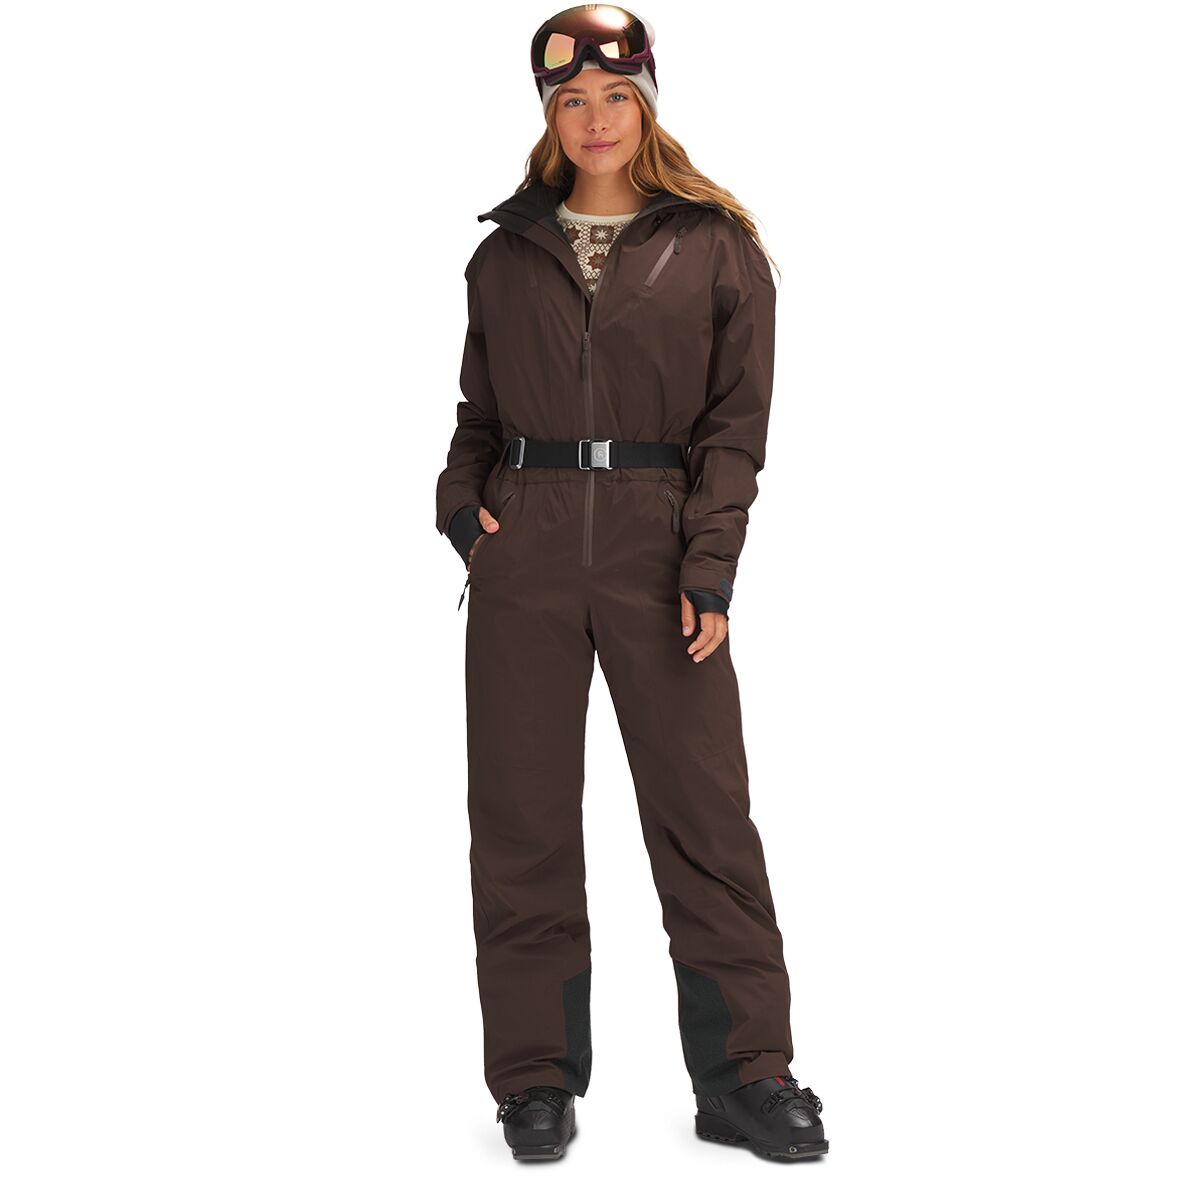 Backcountry Last Chair Stretch Insulated One-Piece Suit - Women's - Clothing | Backcountry